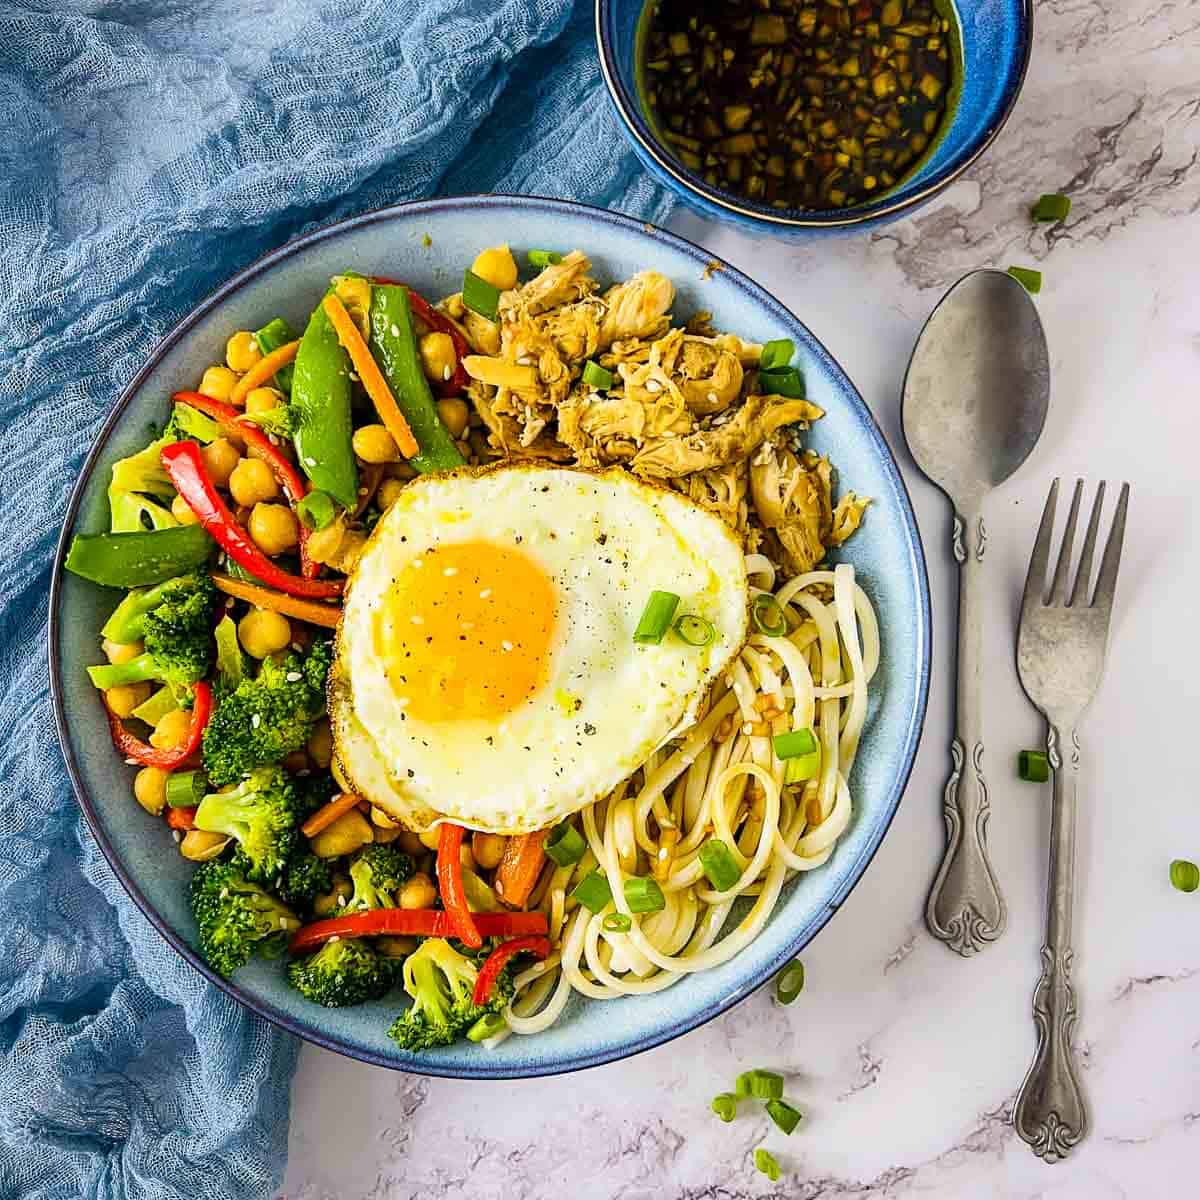 Chicken and chickpea udon noodle bowl topped with fried egg.